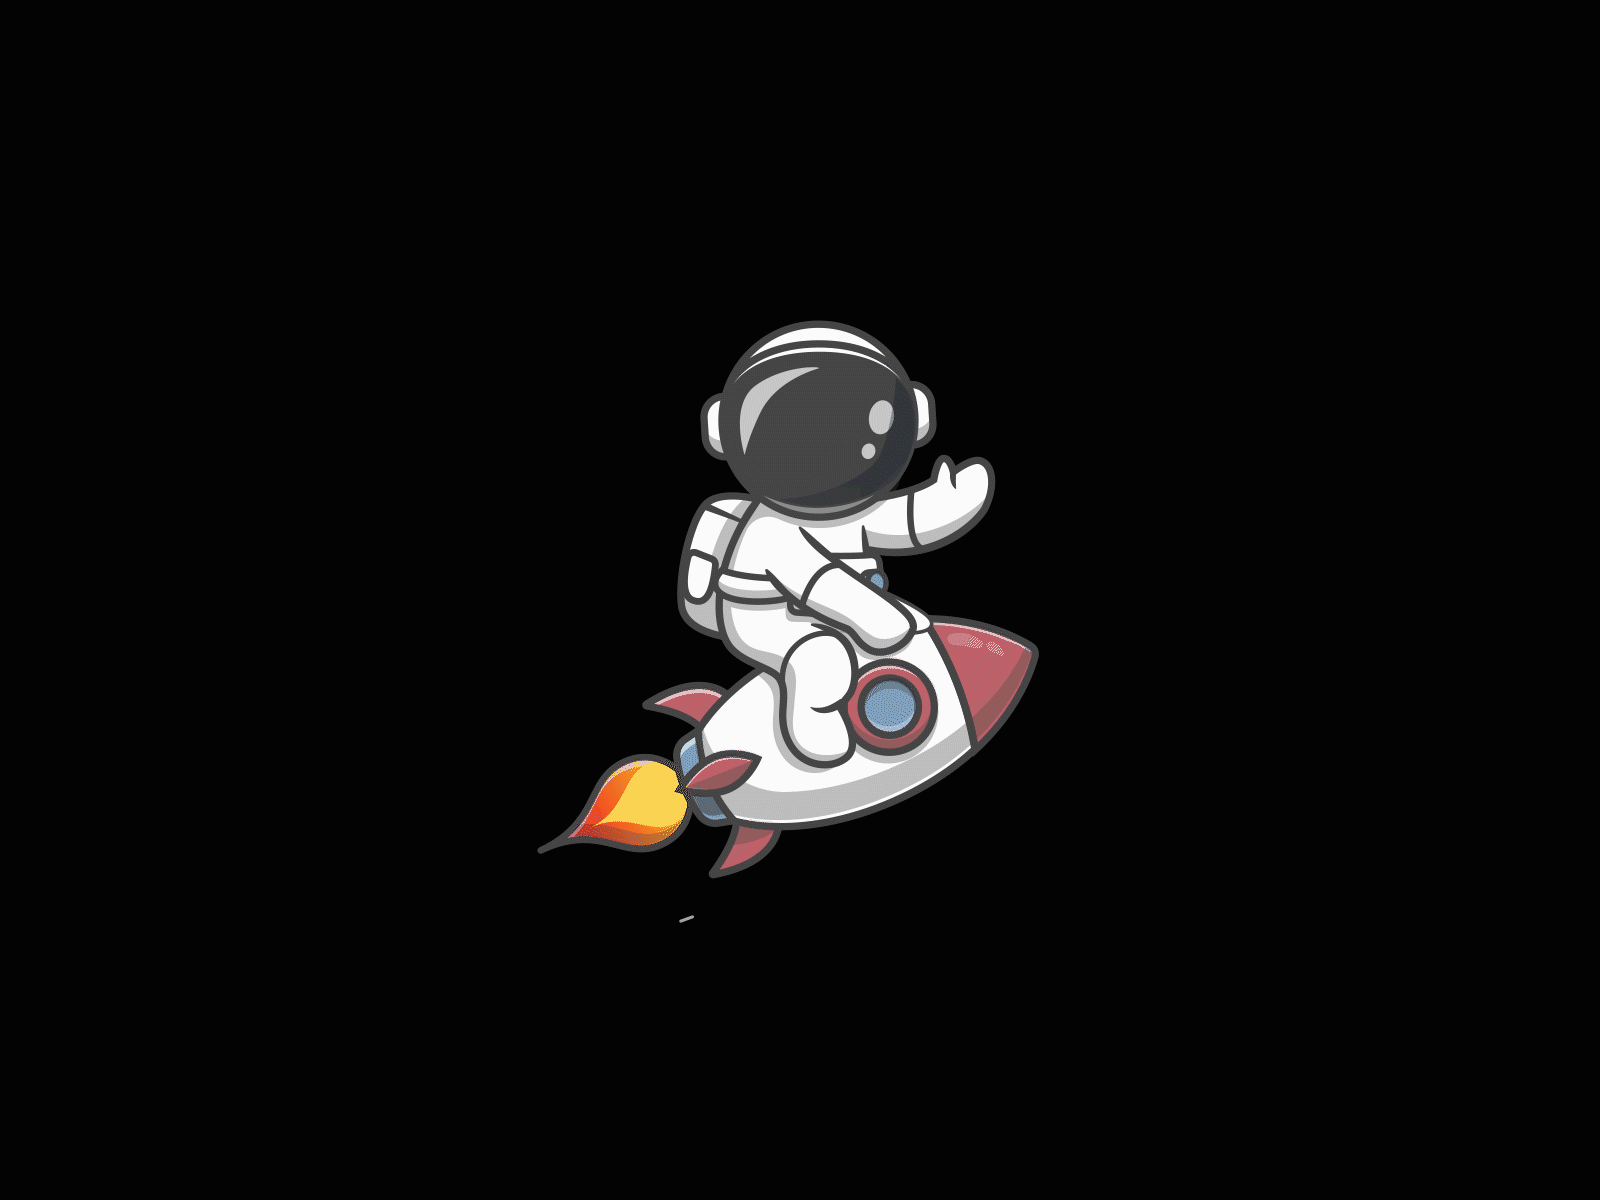 Astronaut is riding the rocket